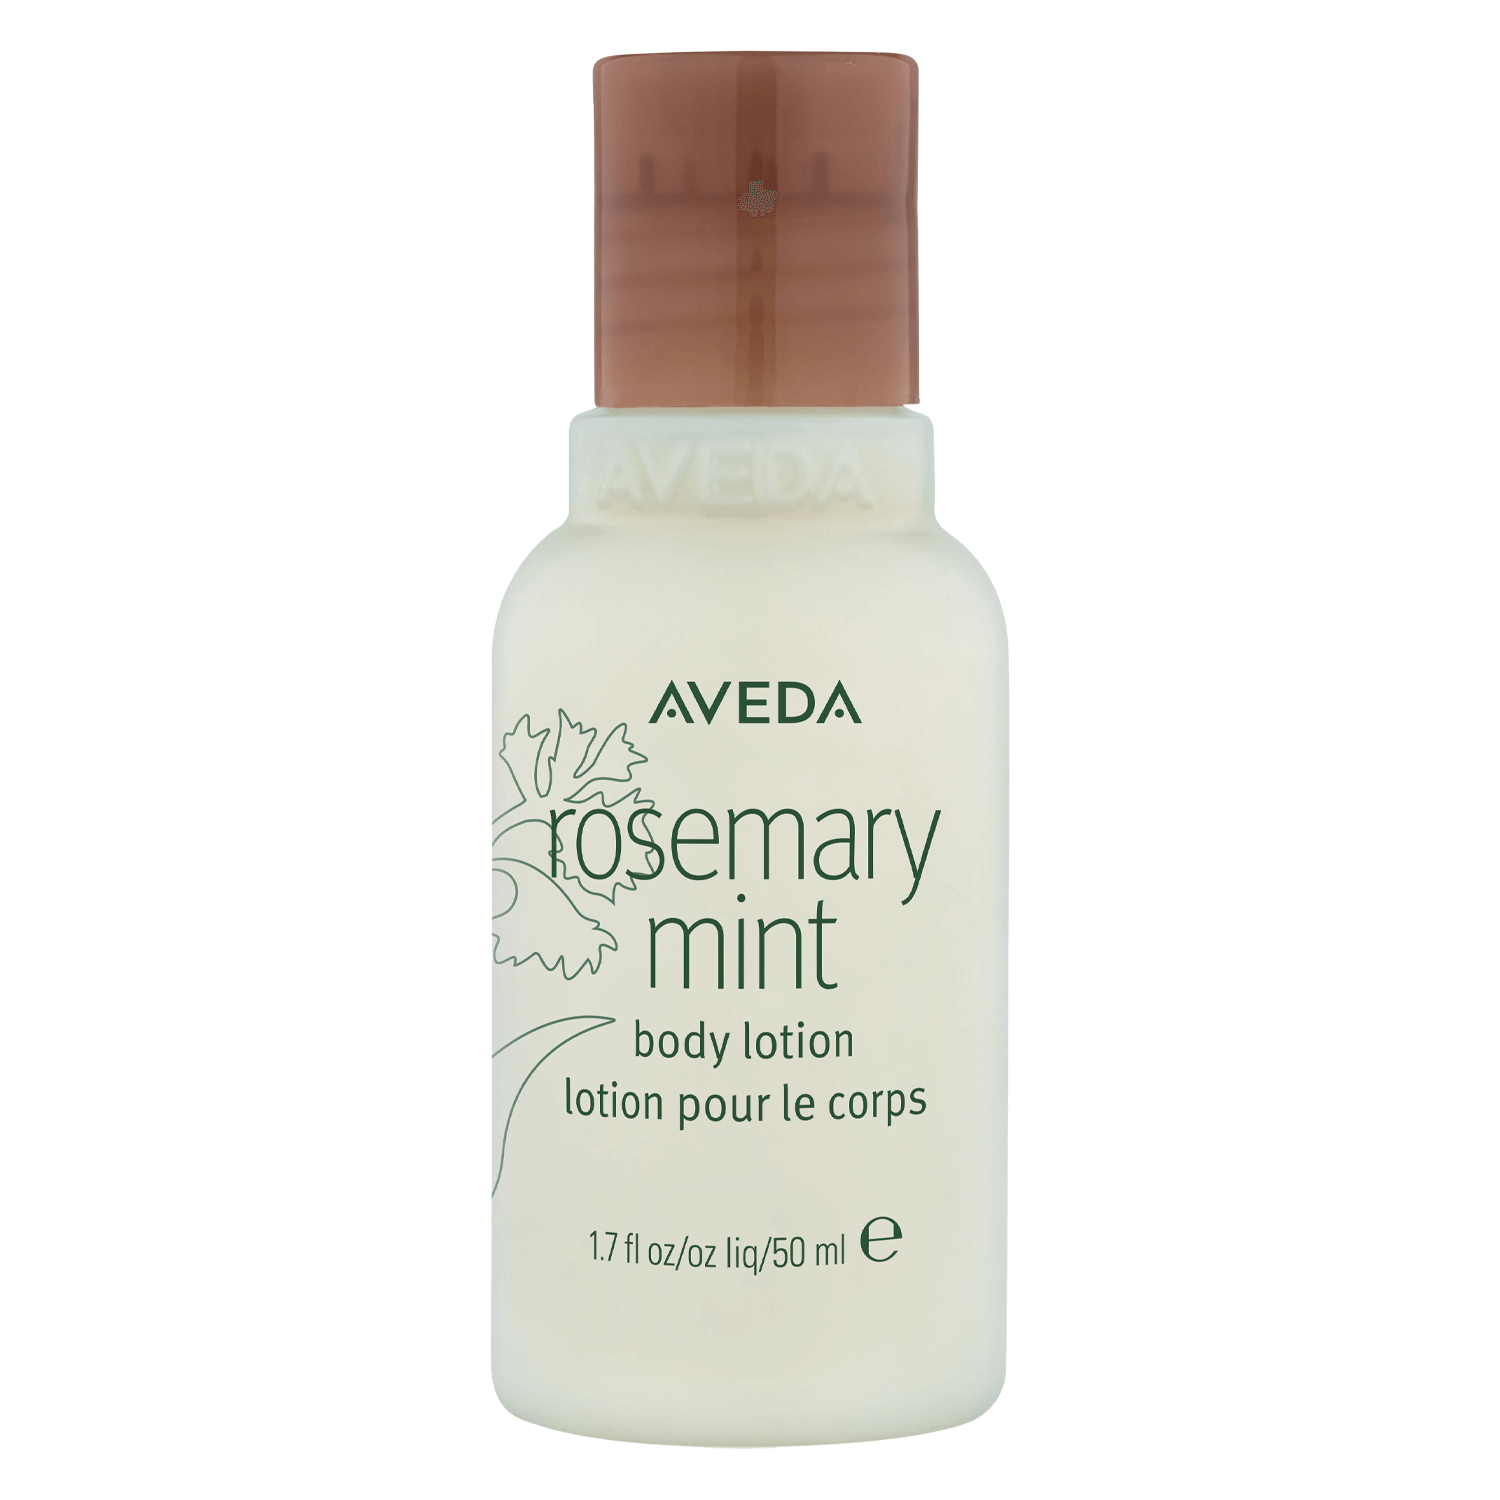 Product image from rosemary mint - body lotion